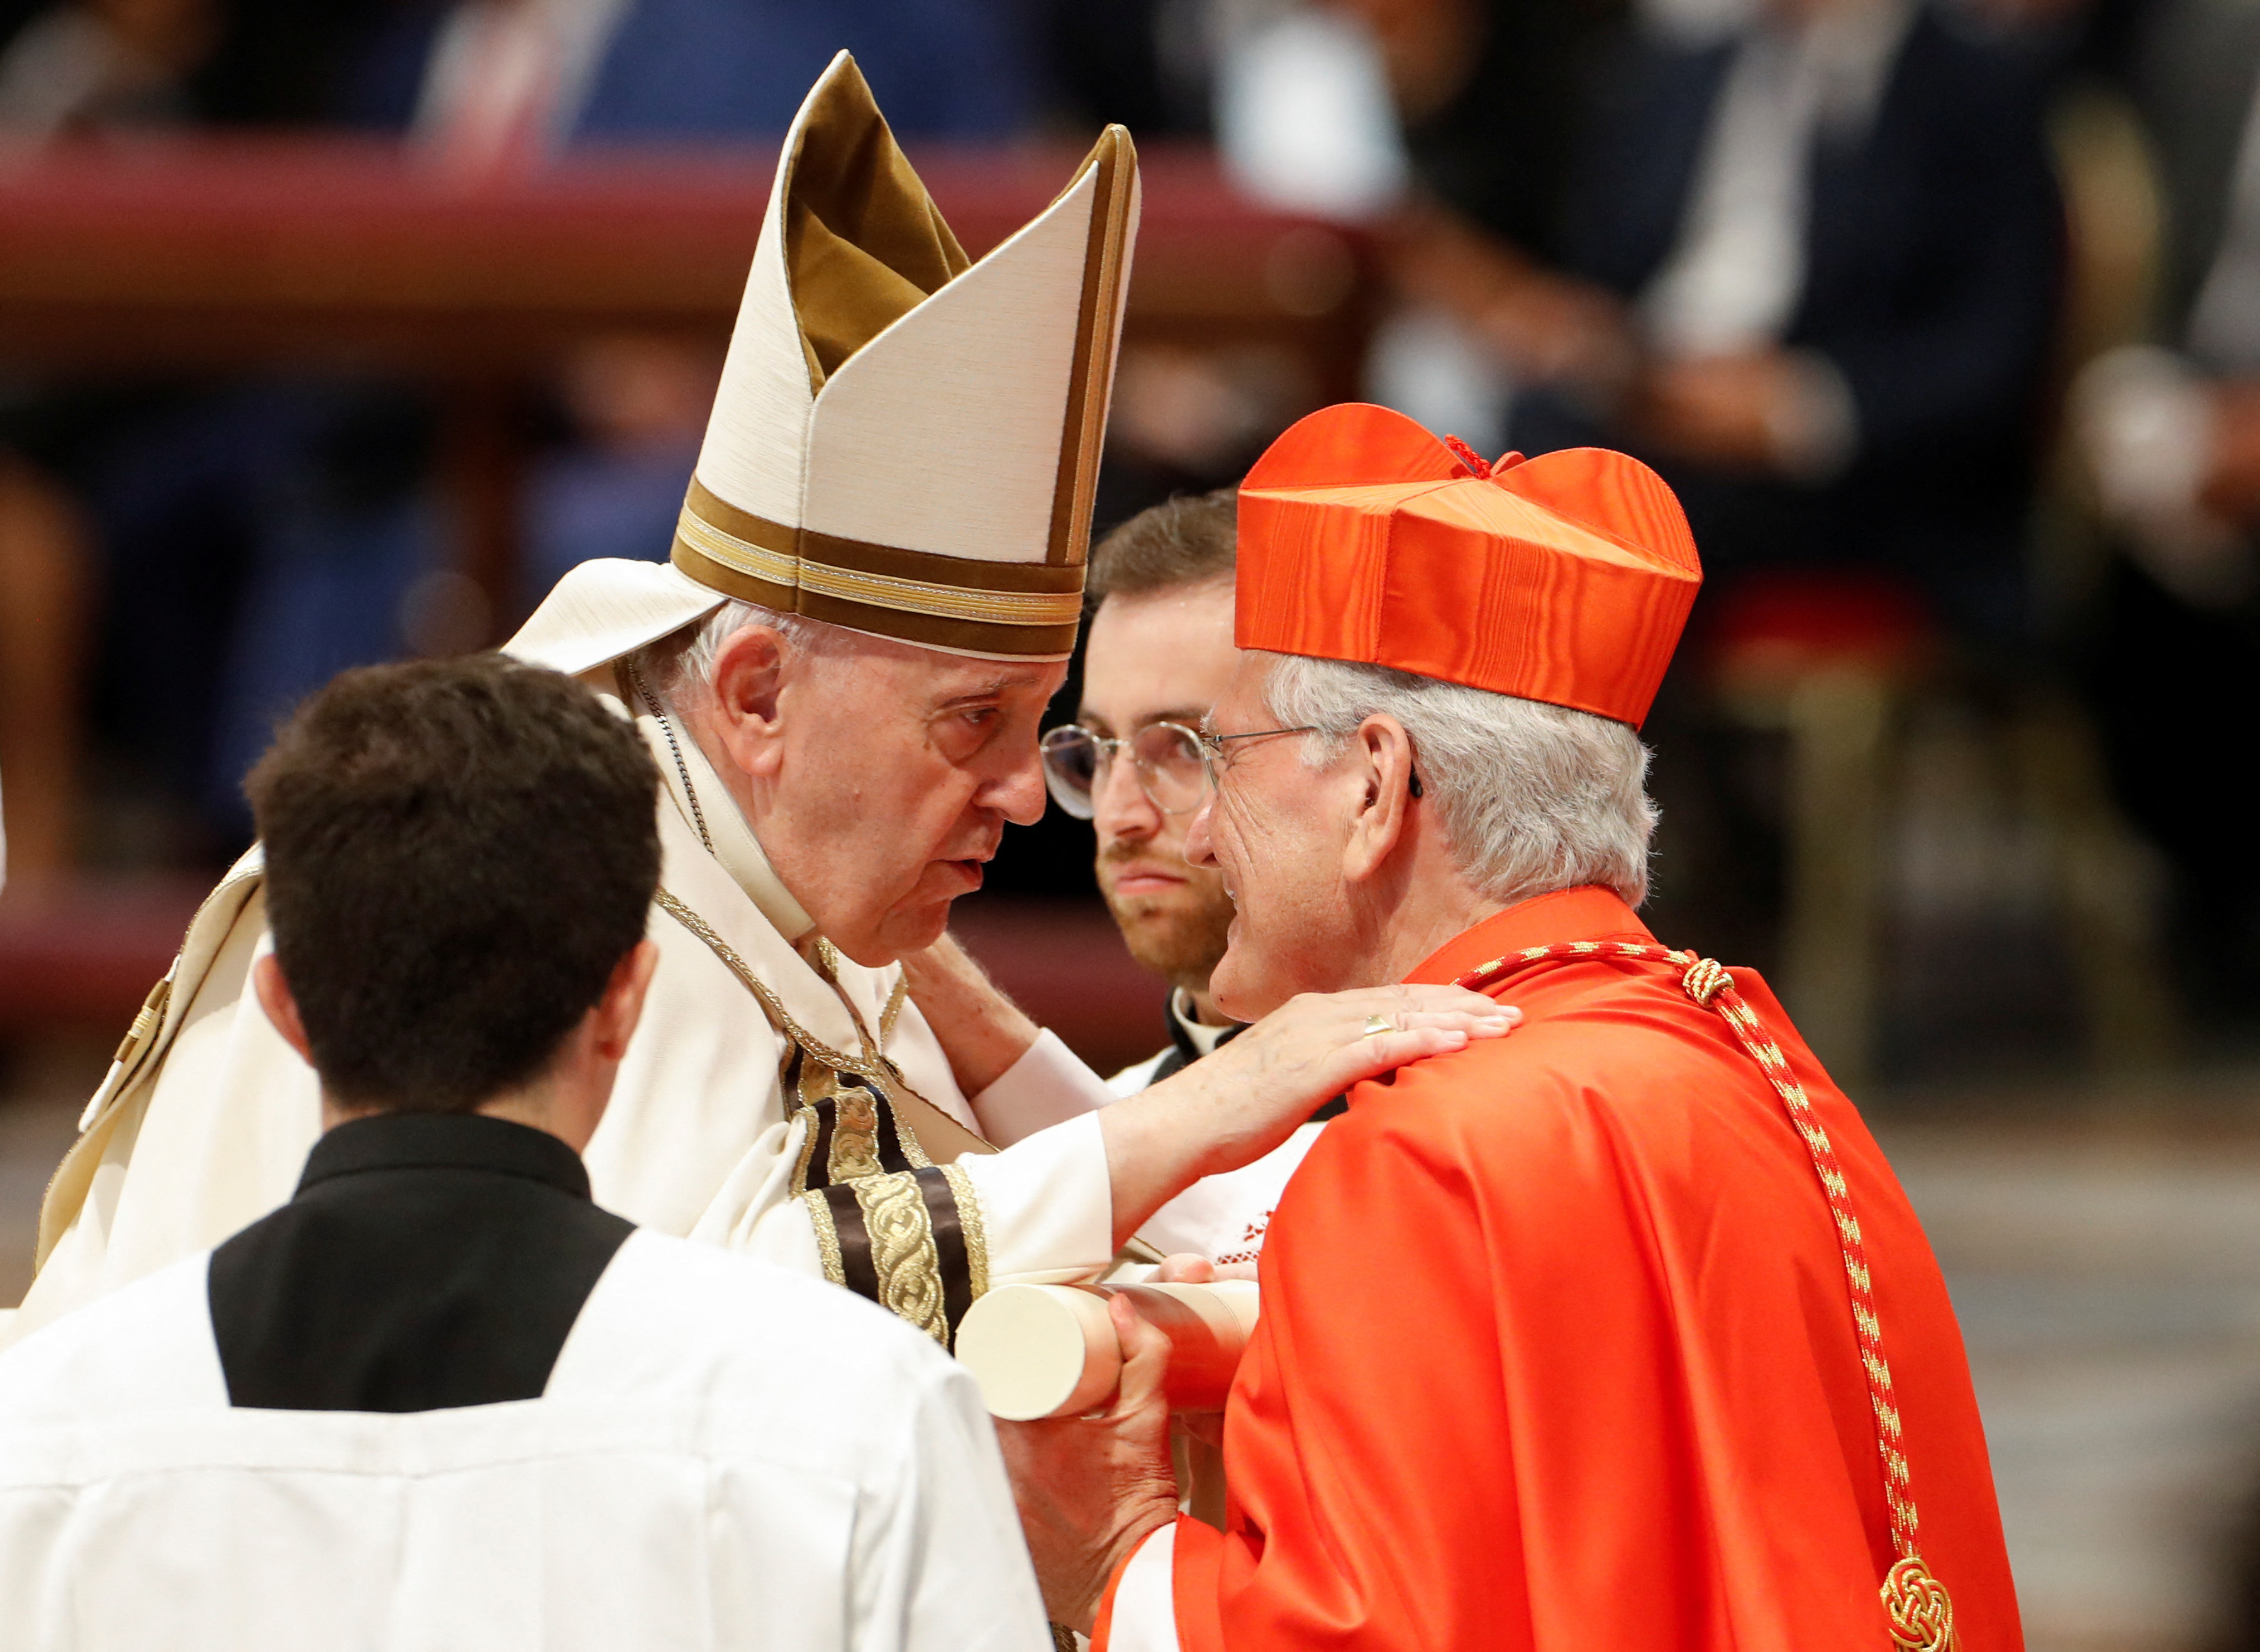 emne gennembore gjorde det With new cardinals, pope puts stamp on Church future | Reuters